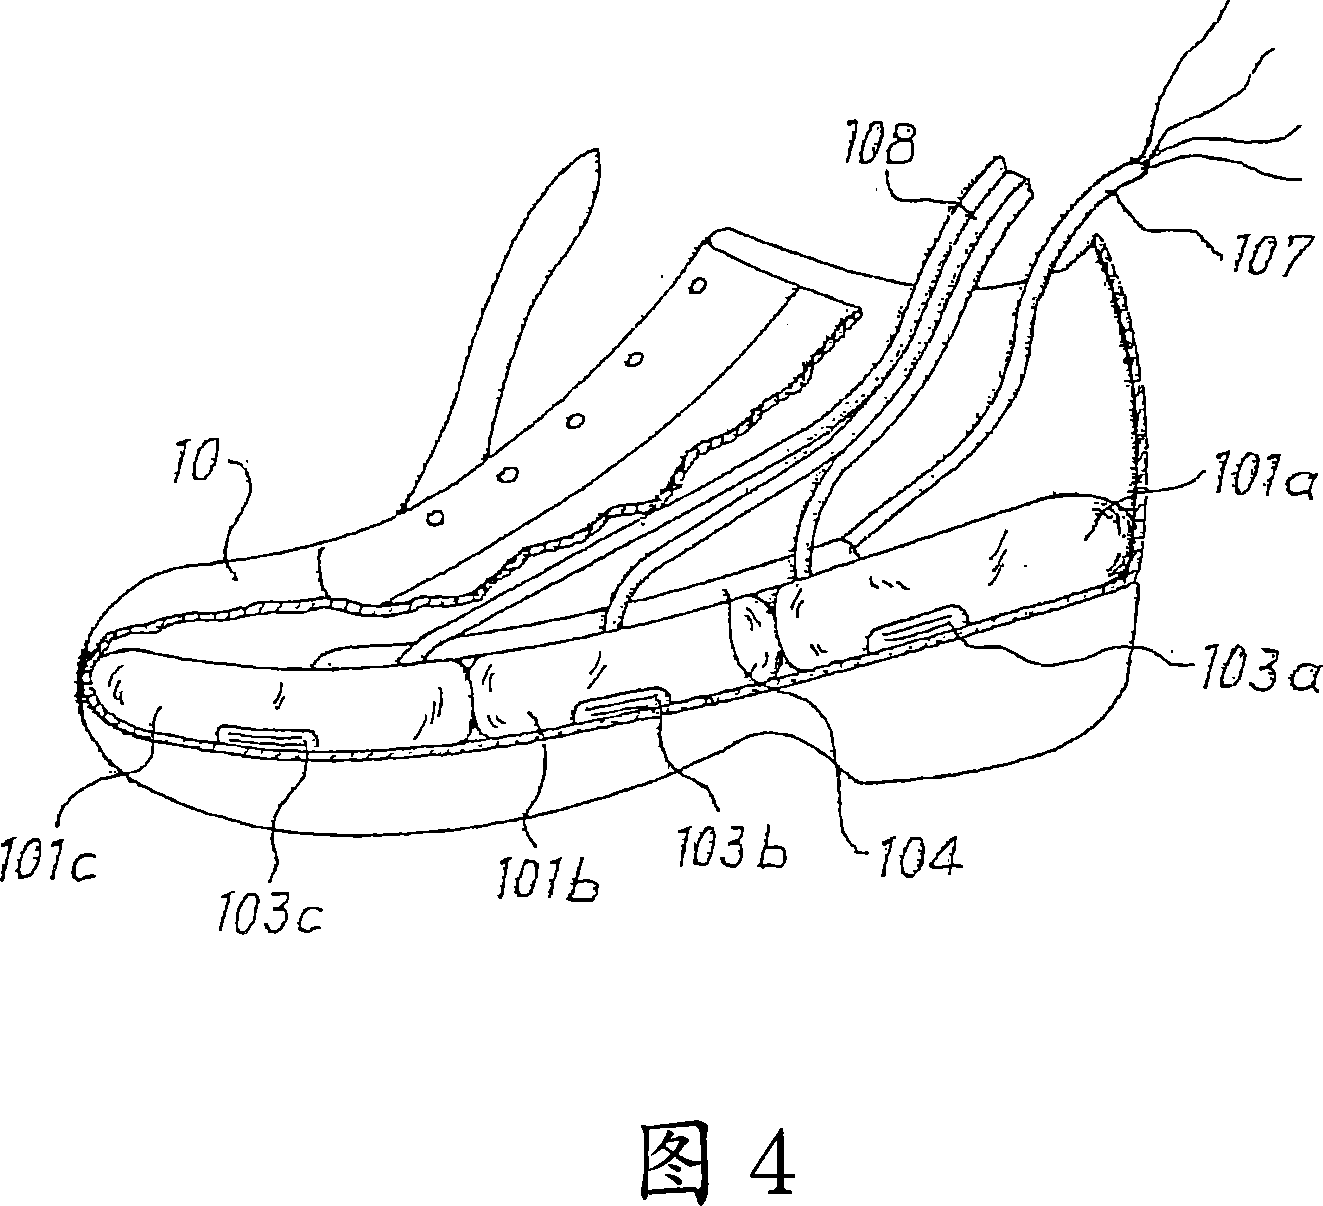 A method and device for inspecting the interior of a footwear